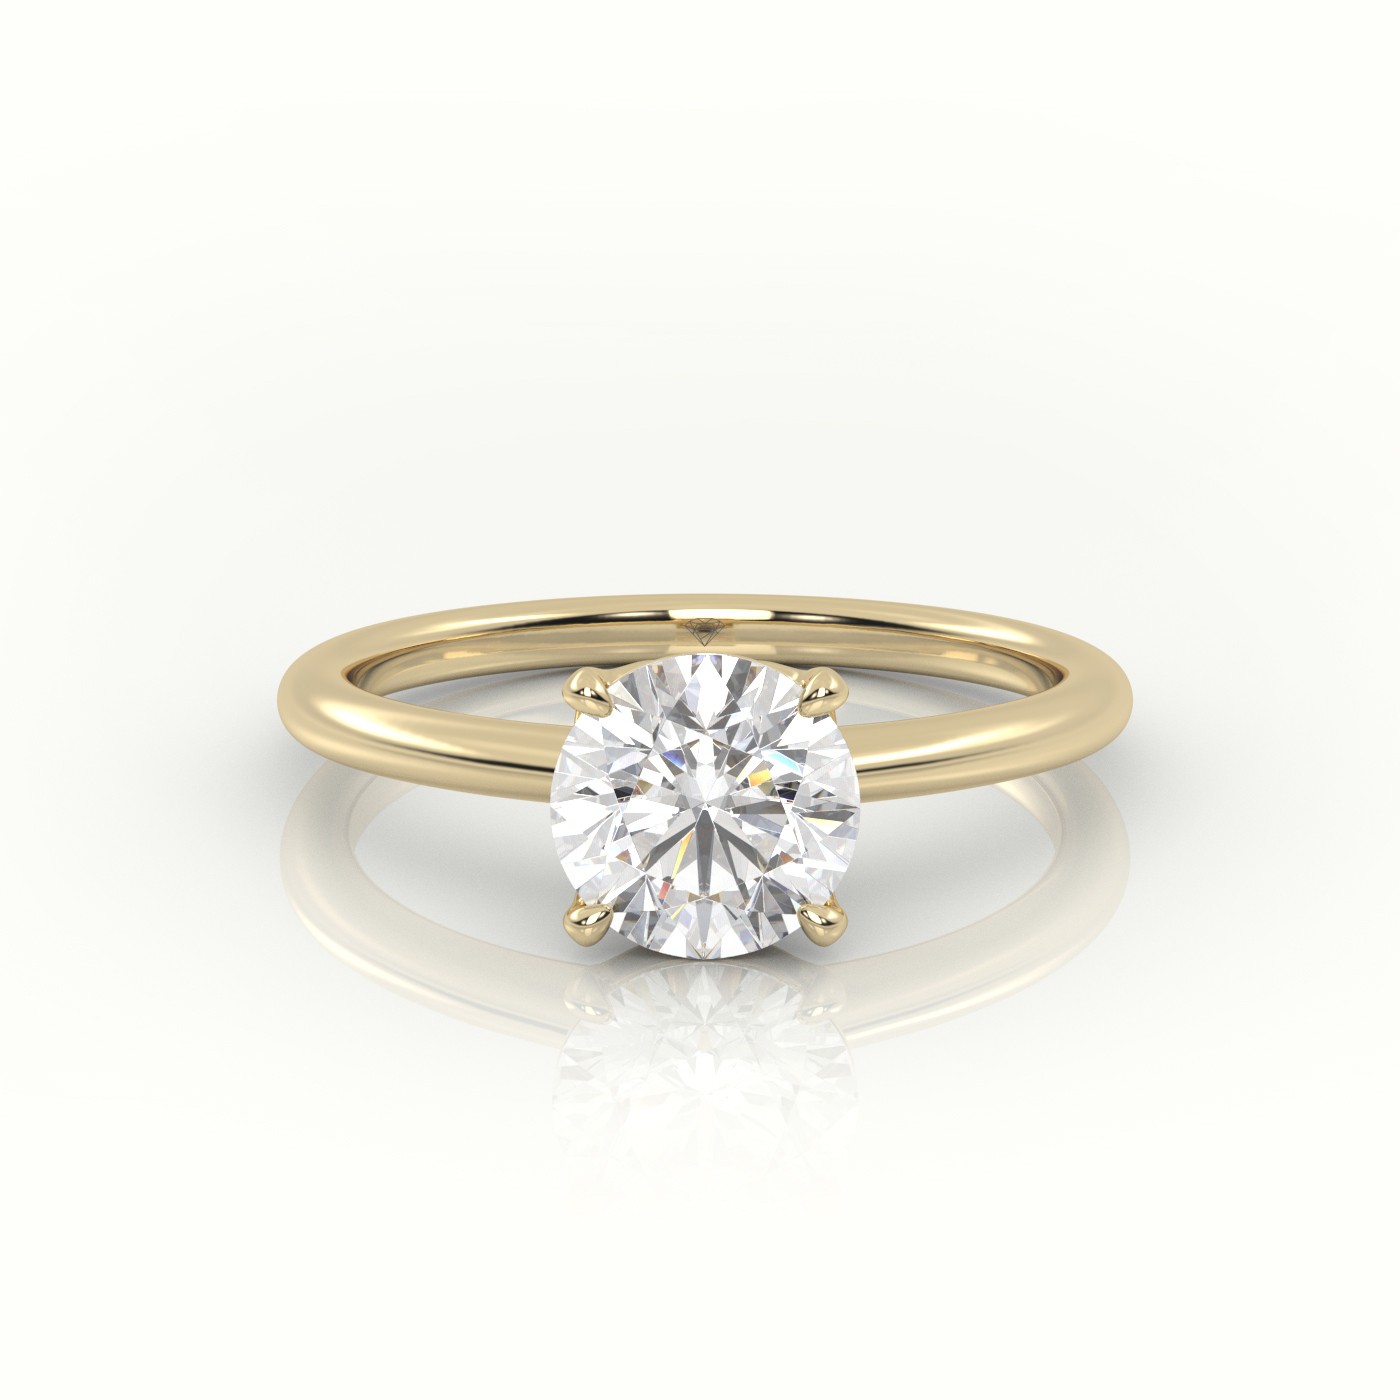 18K YELLOW GOLD ROUND CUT DIAMOND 4 PRONGS CLASSIC SOLITAIRE ENGAGEMENT RING